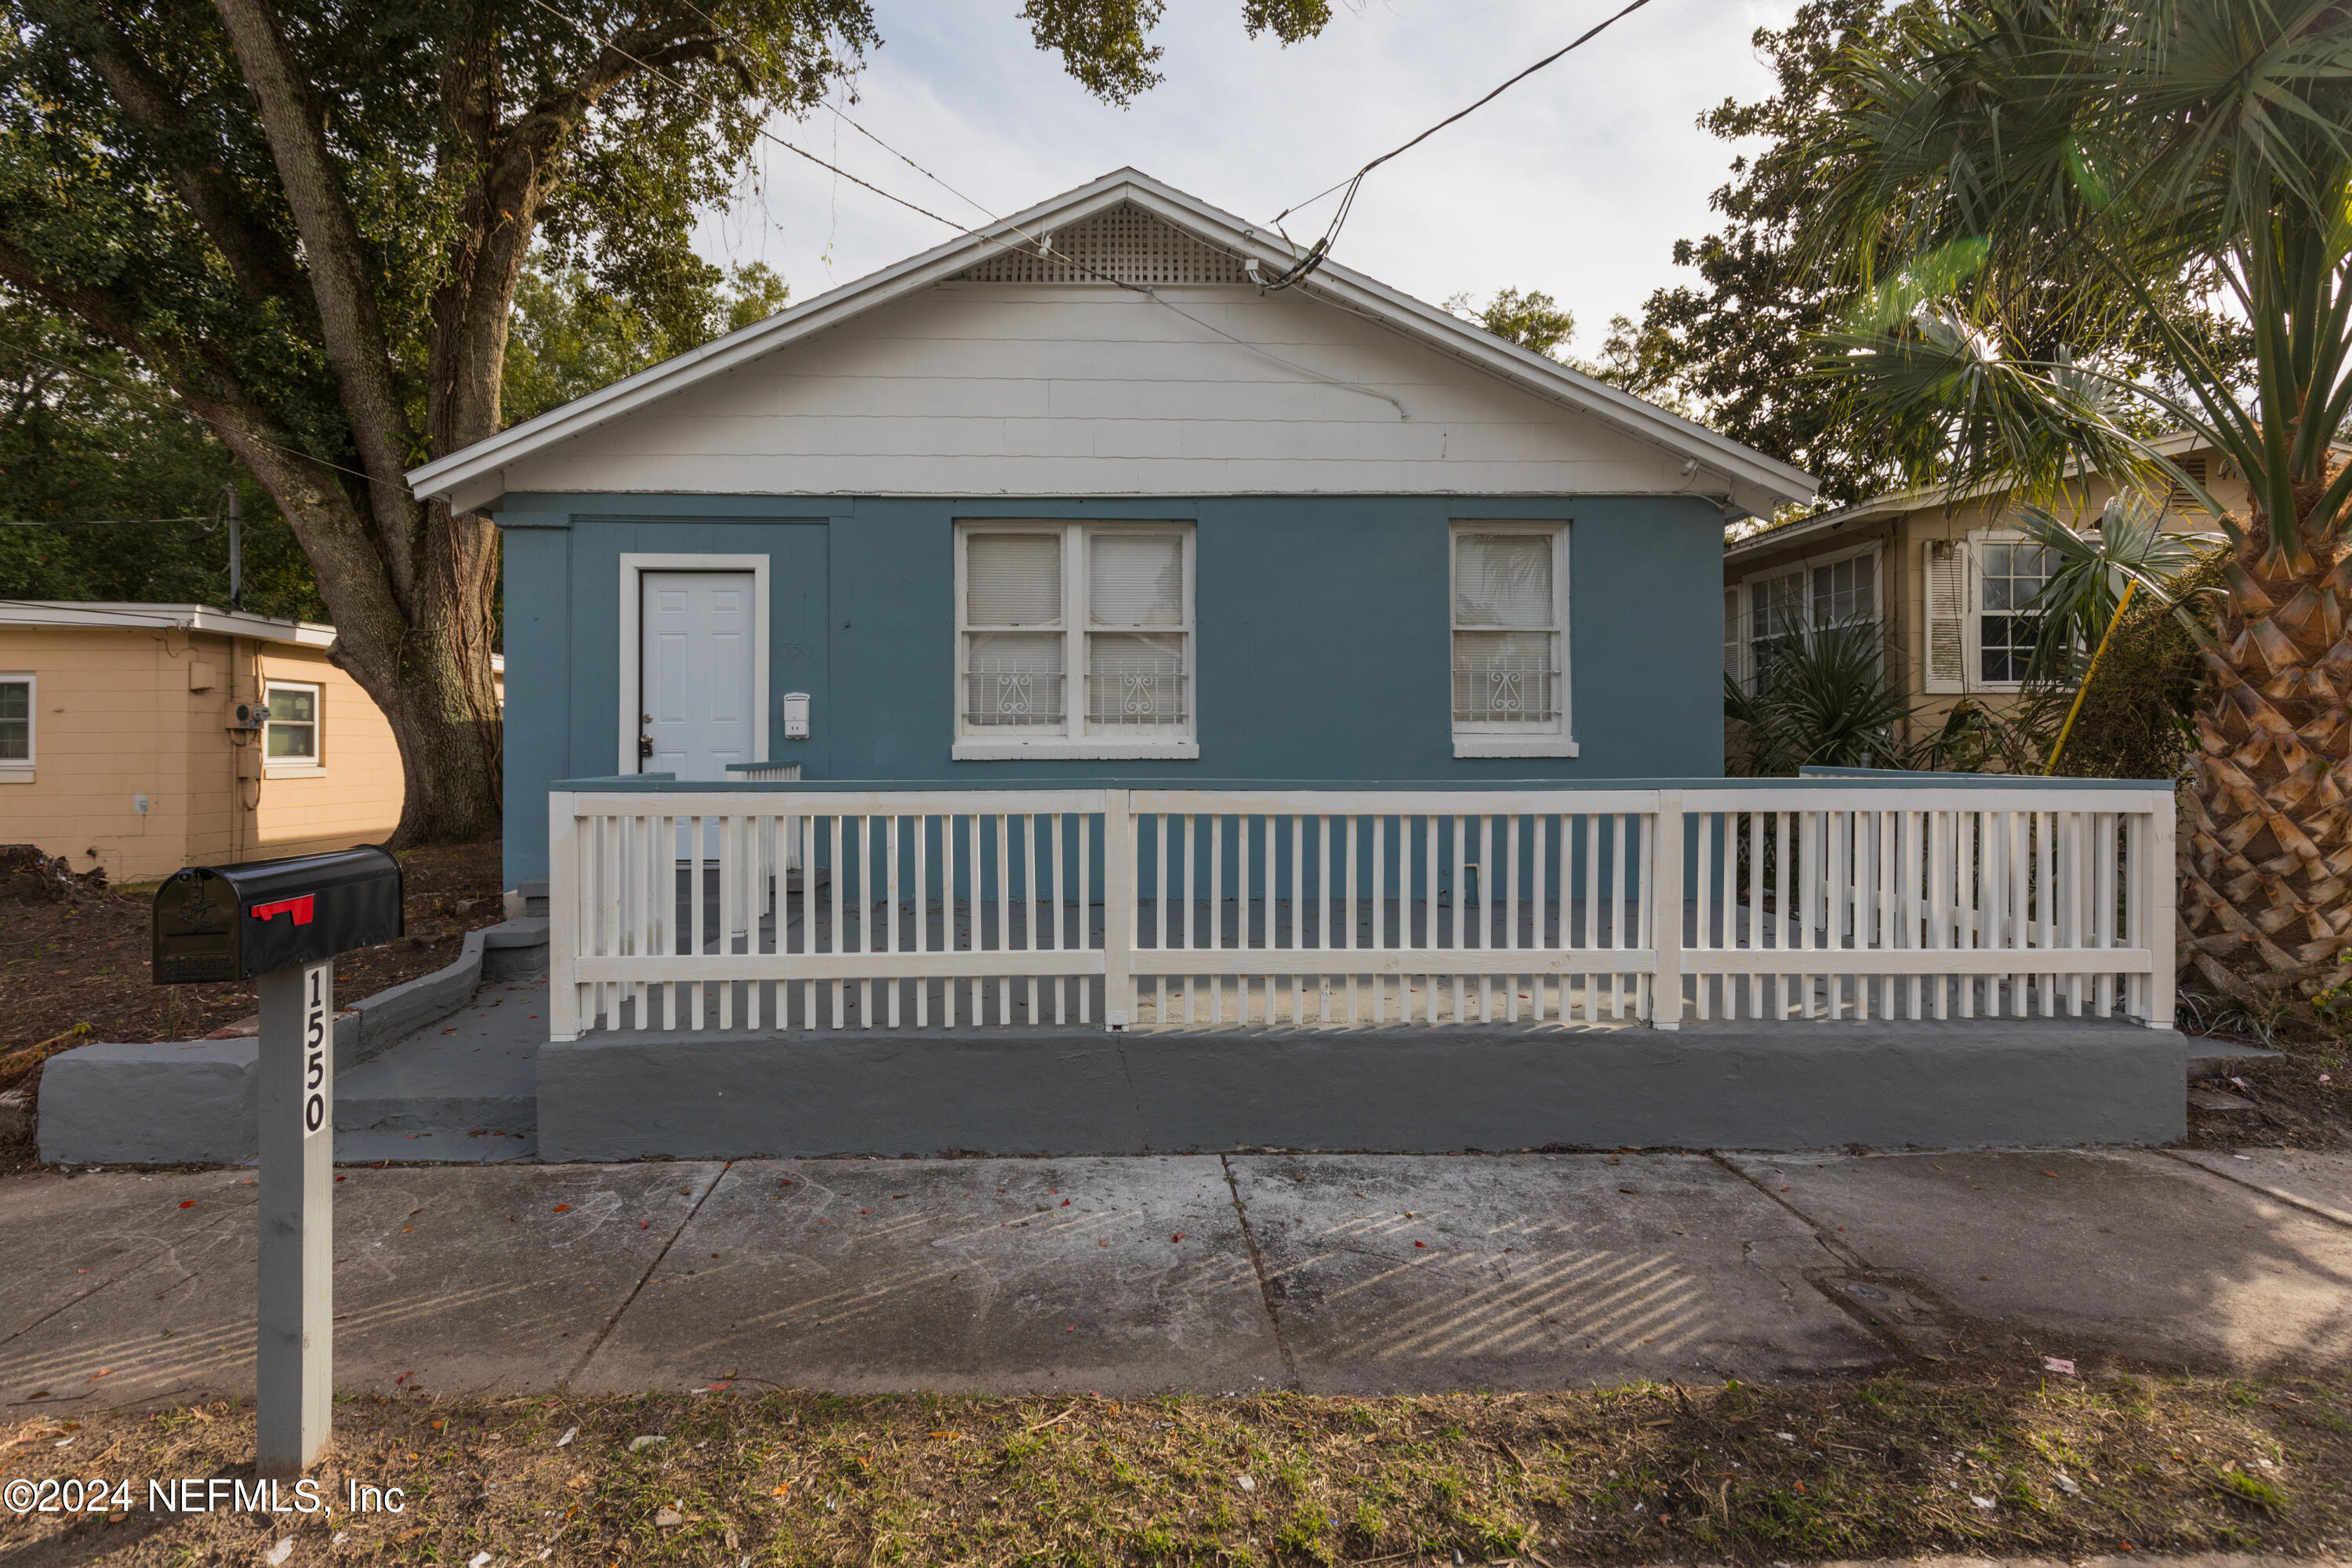 Jacksonville, FL home for sale located at 1550 W 2nd Street, Jacksonville, FL 32209